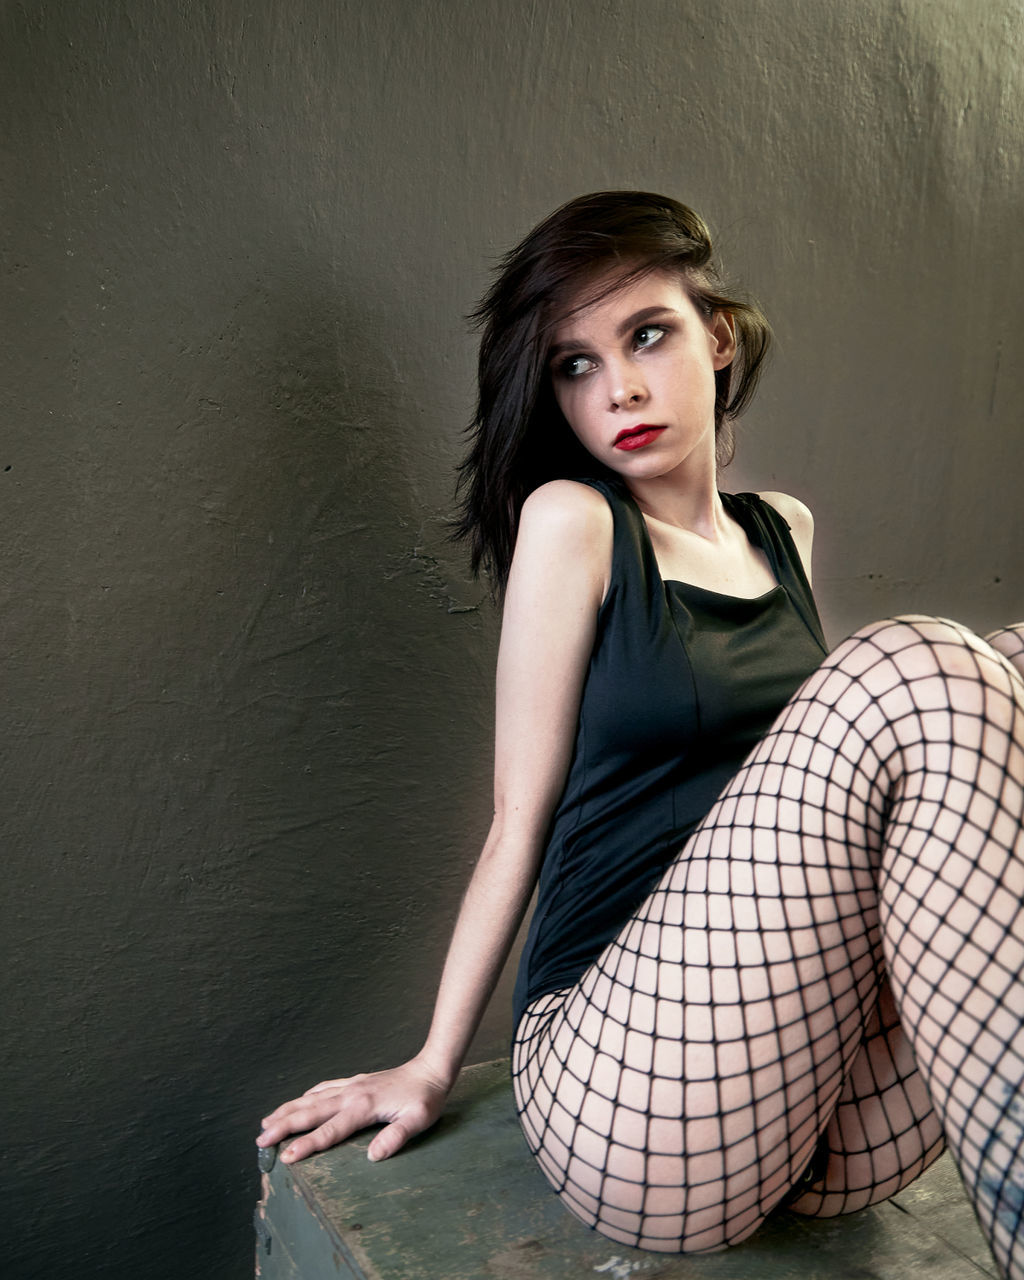 women, adult, fashion, one person, portrait, young adult, photo shoot, hairstyle, looking at camera, sitting, clothing, long hair, female, dress, portrait photography, brown hair, elegance, glamour, black, human leg, indoors, person, haute couture, contemplation, make-up, limb, desire, shoe, looking, full length